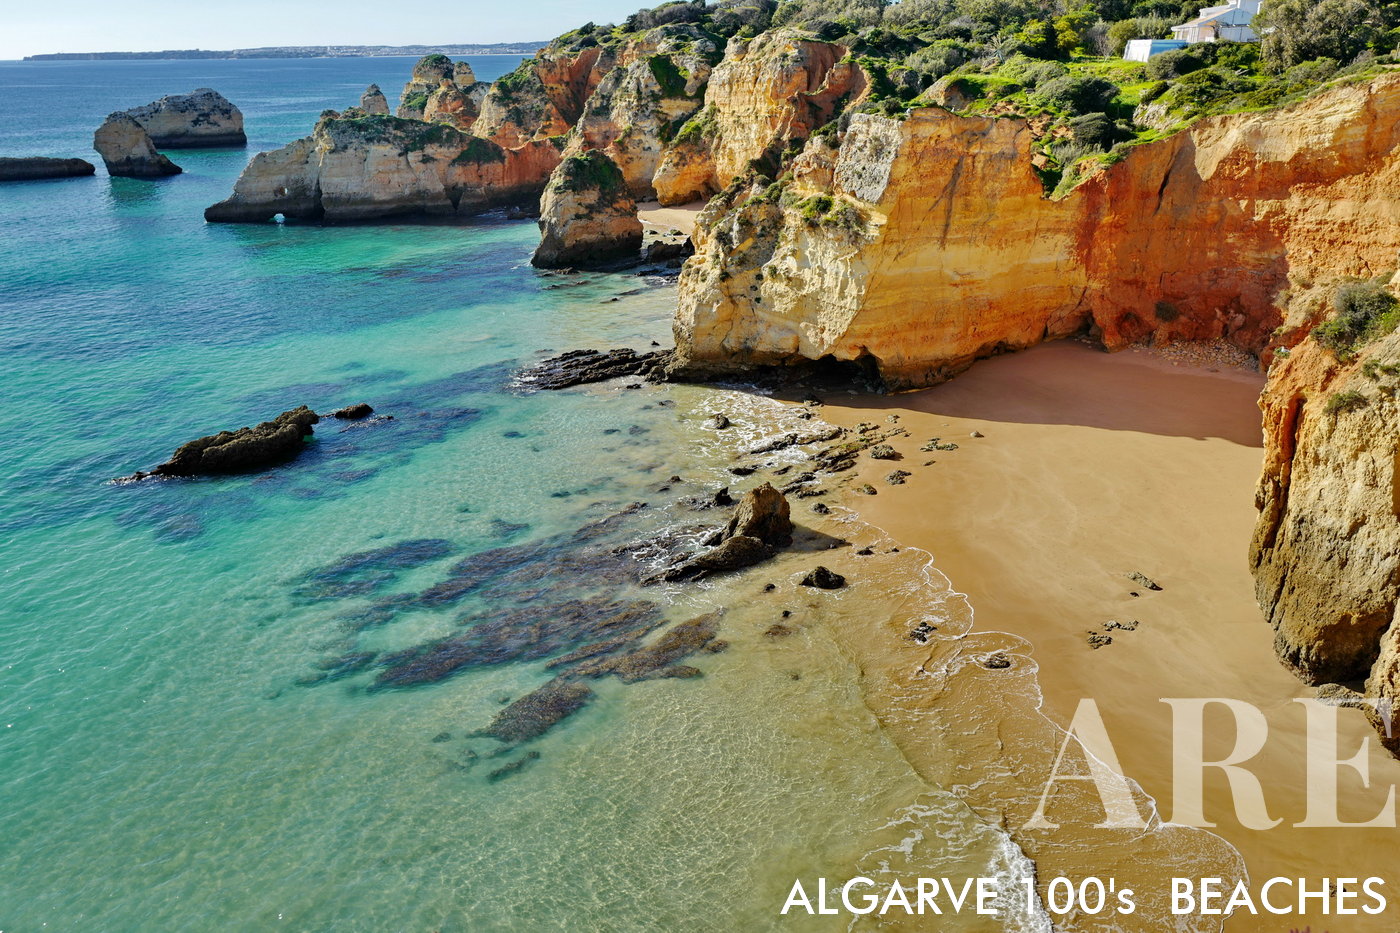 Secreta beach, located between Alvor and Portimão, several small beaches with difficult access, with a fantastic pedestrian route along the cliff...